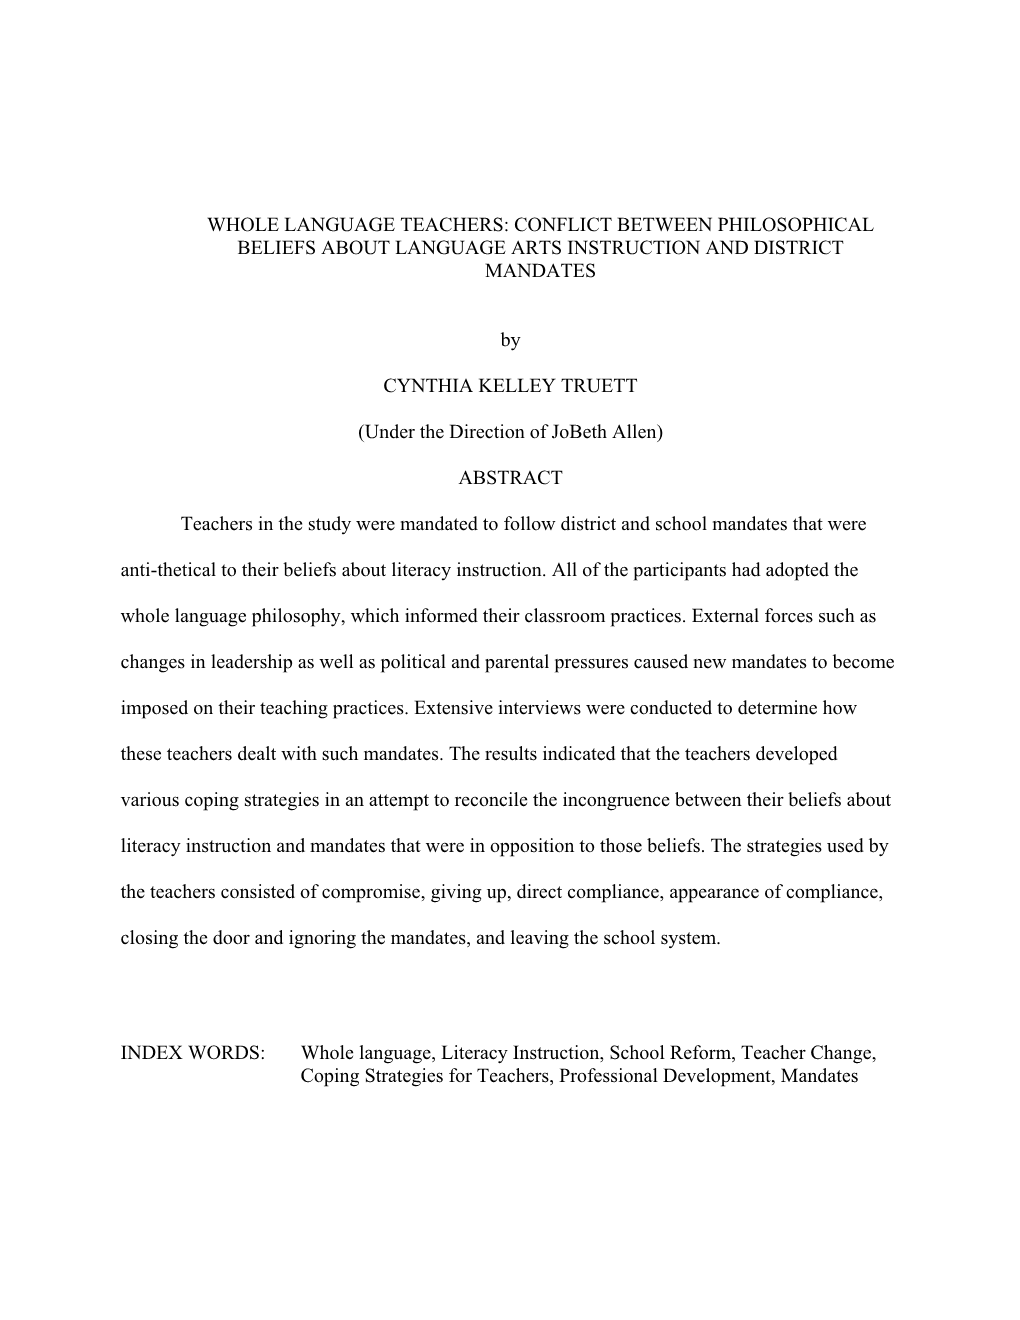 Conflict Between Philosophical Beliefs About Language Arts Instruction and District Mandates